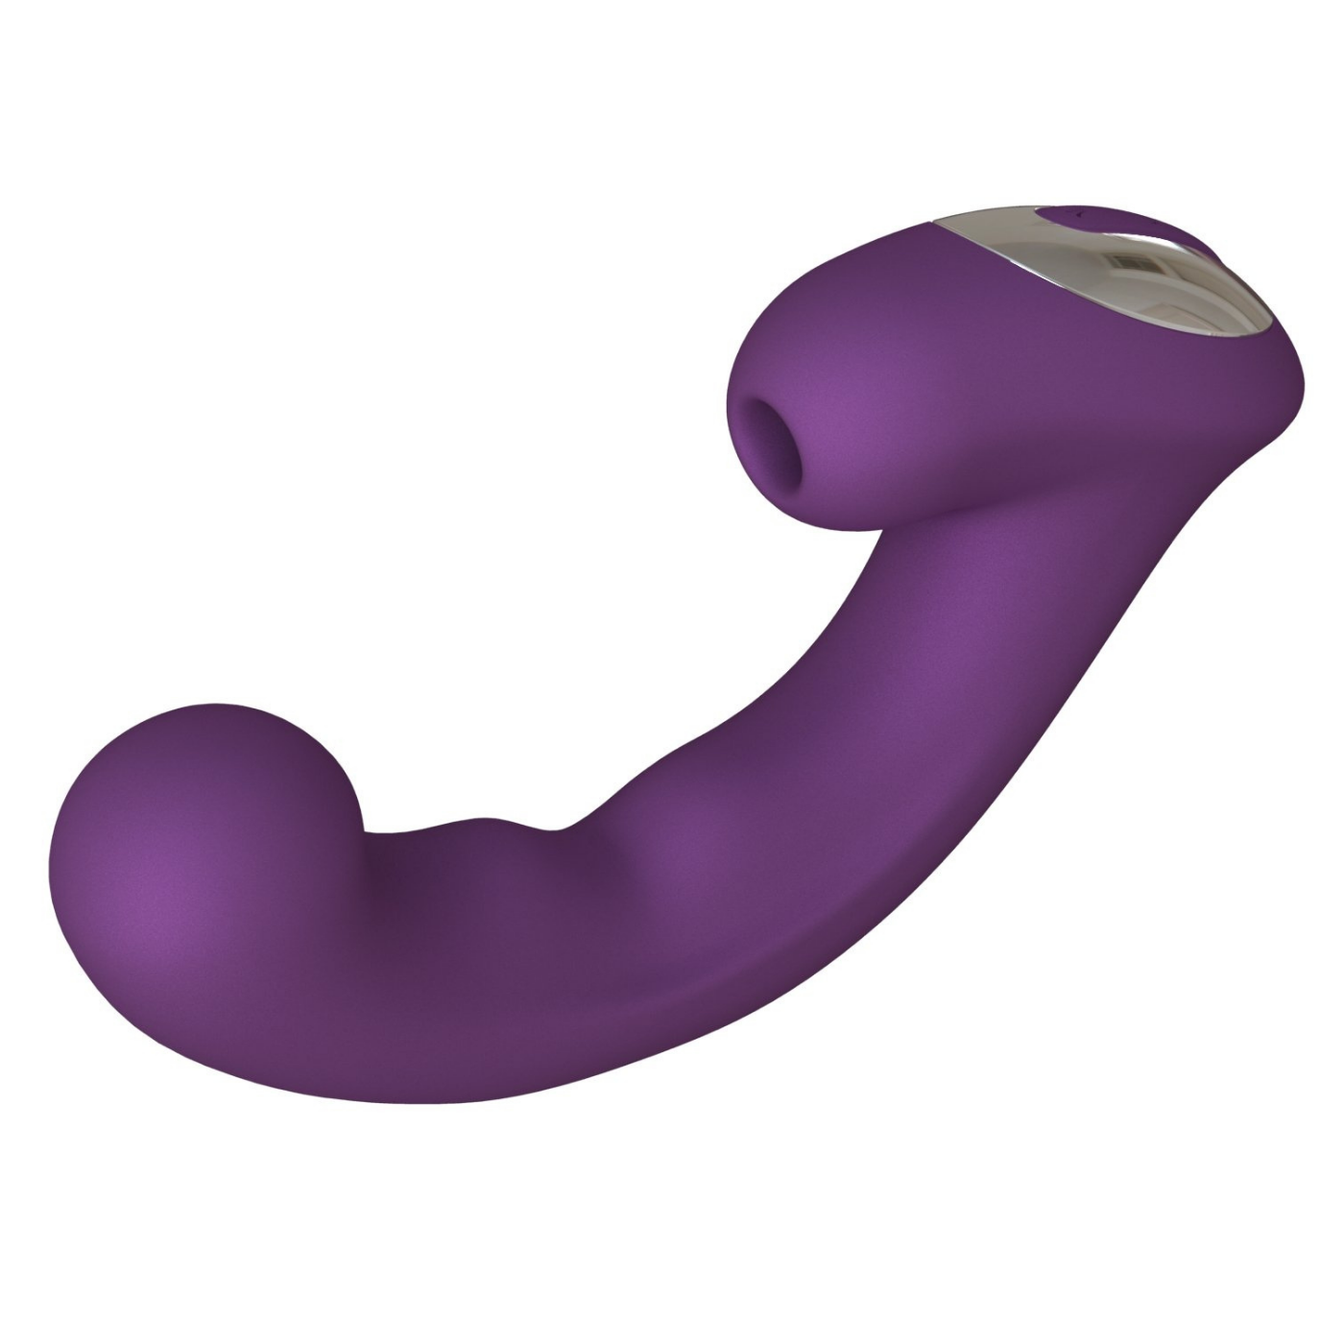 Purple curved g-spot sex toy for her